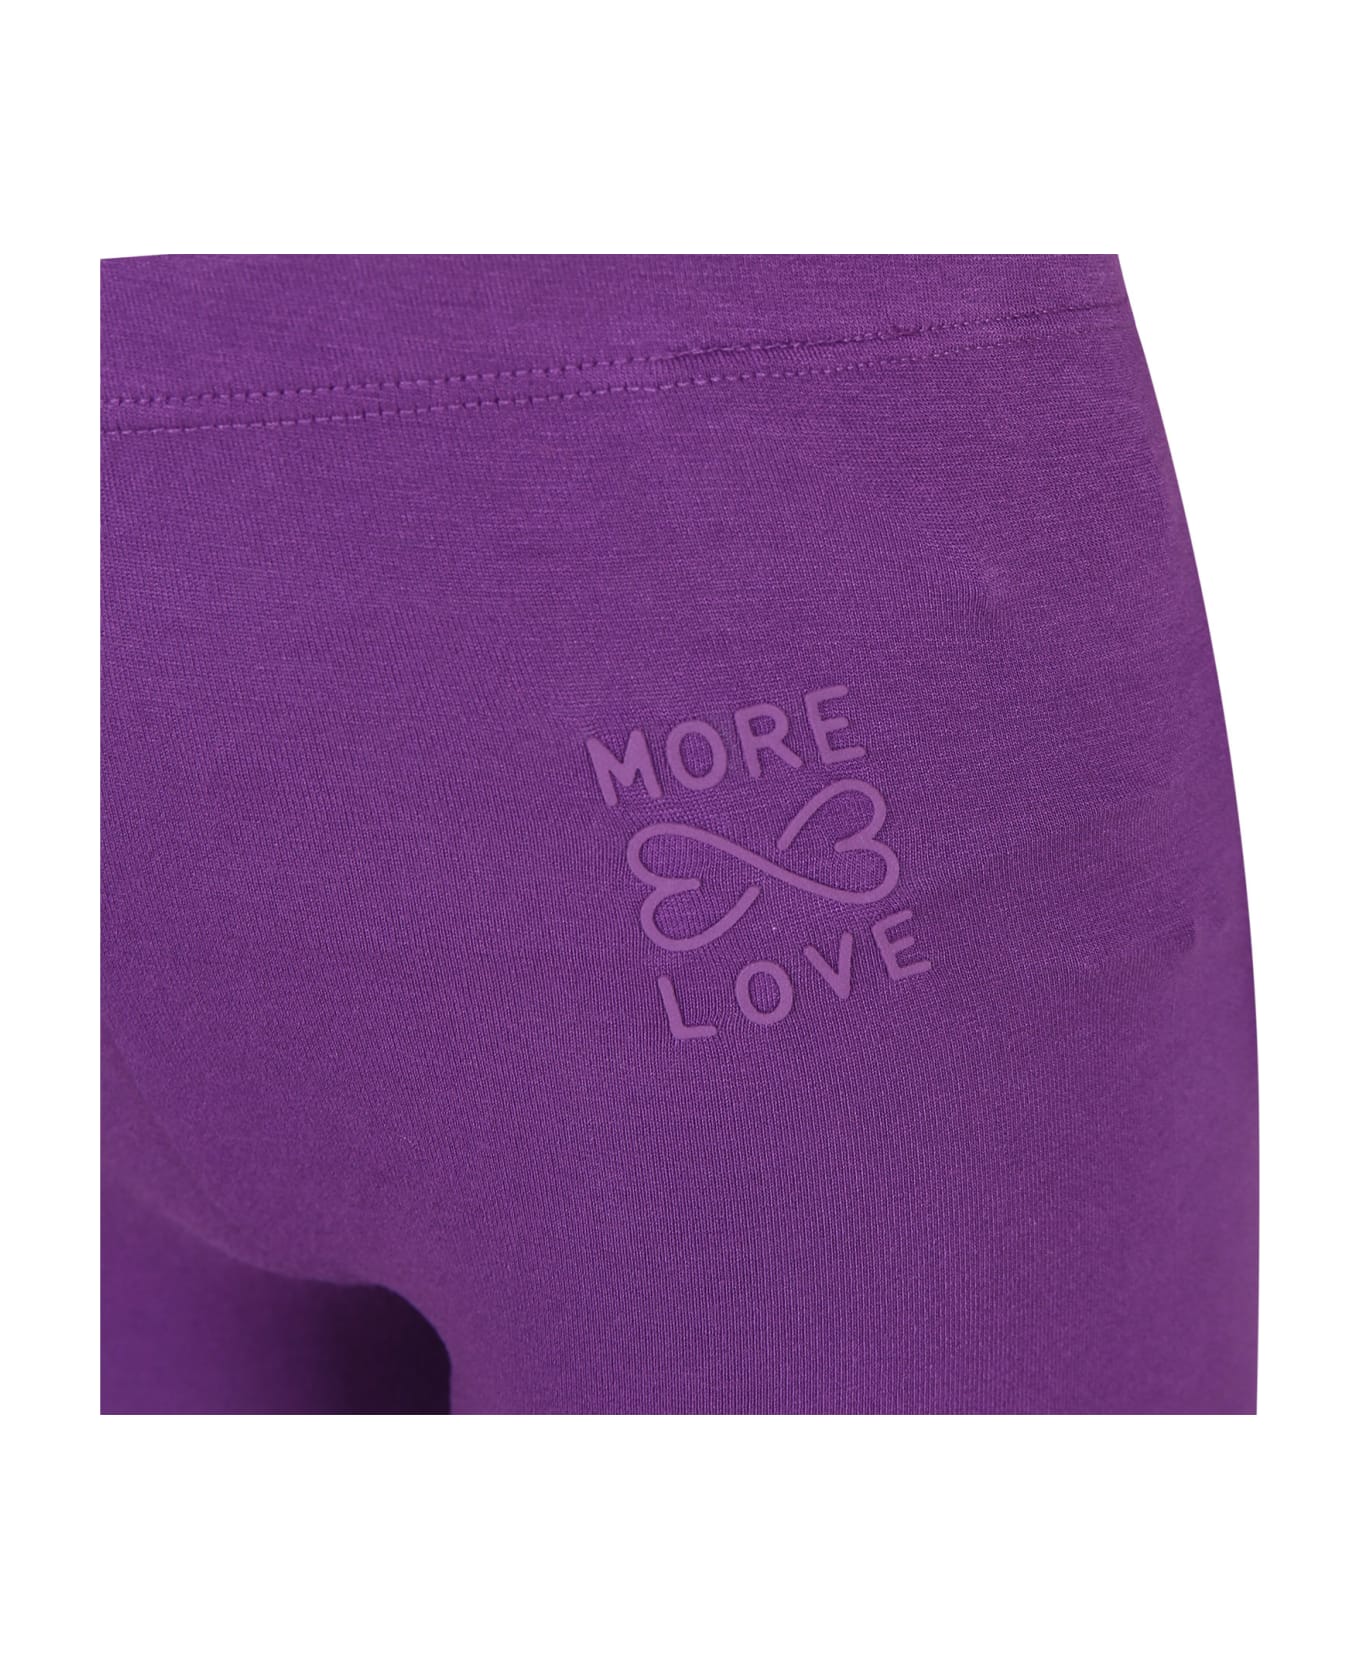 Molo Purple Leggings For Girl With Writing - Violet